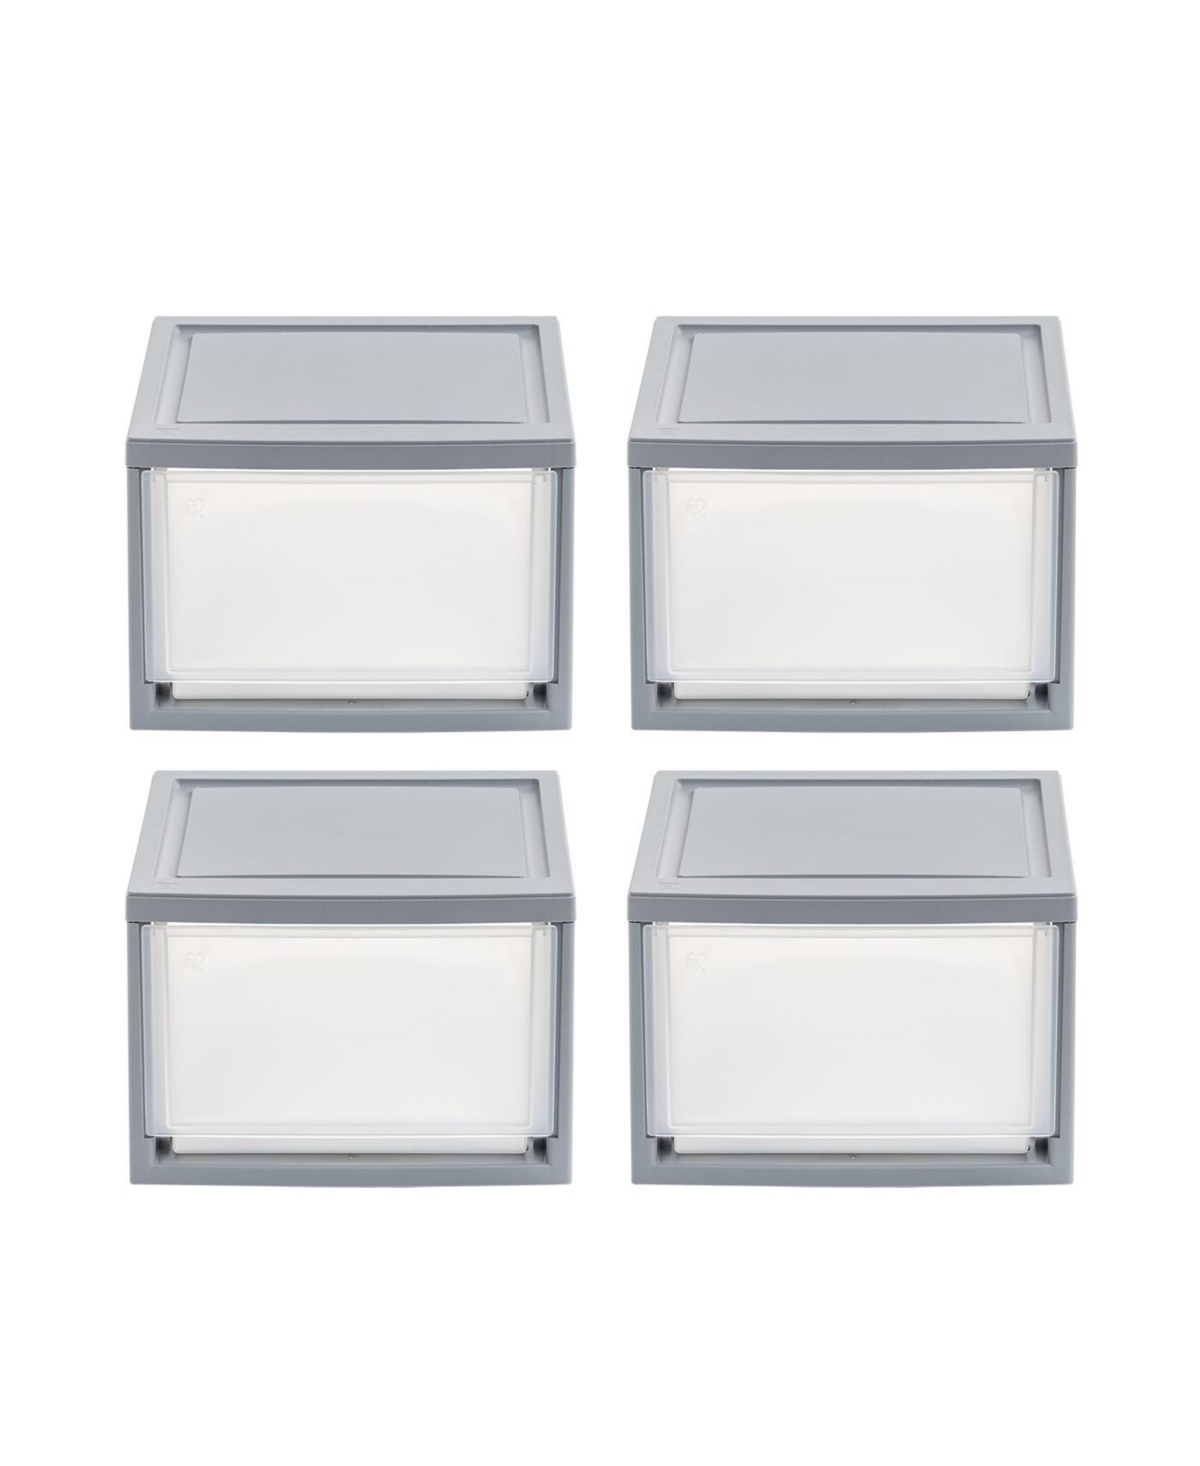 14 Quart Stackable Clear Plastic Storage Drawer, Gray, Set of 4 - Grey